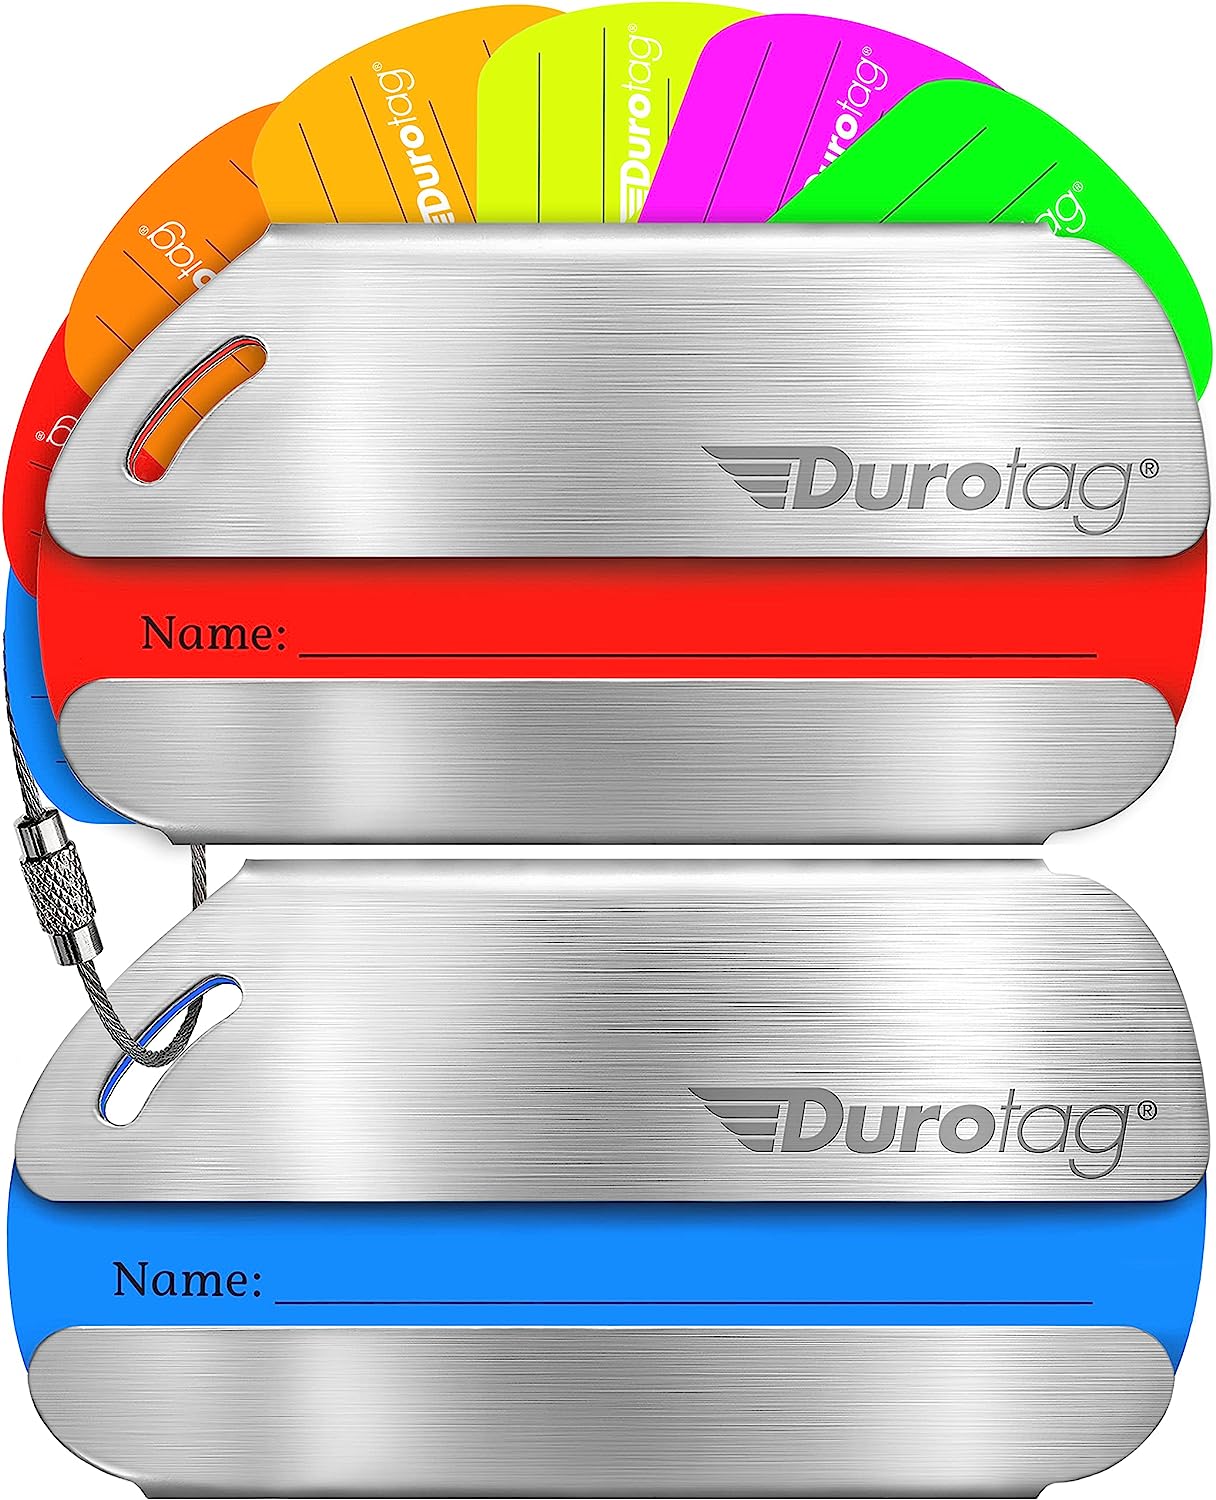 Durotag Luggage Tags for Suitcases - Travel Tags for [...]